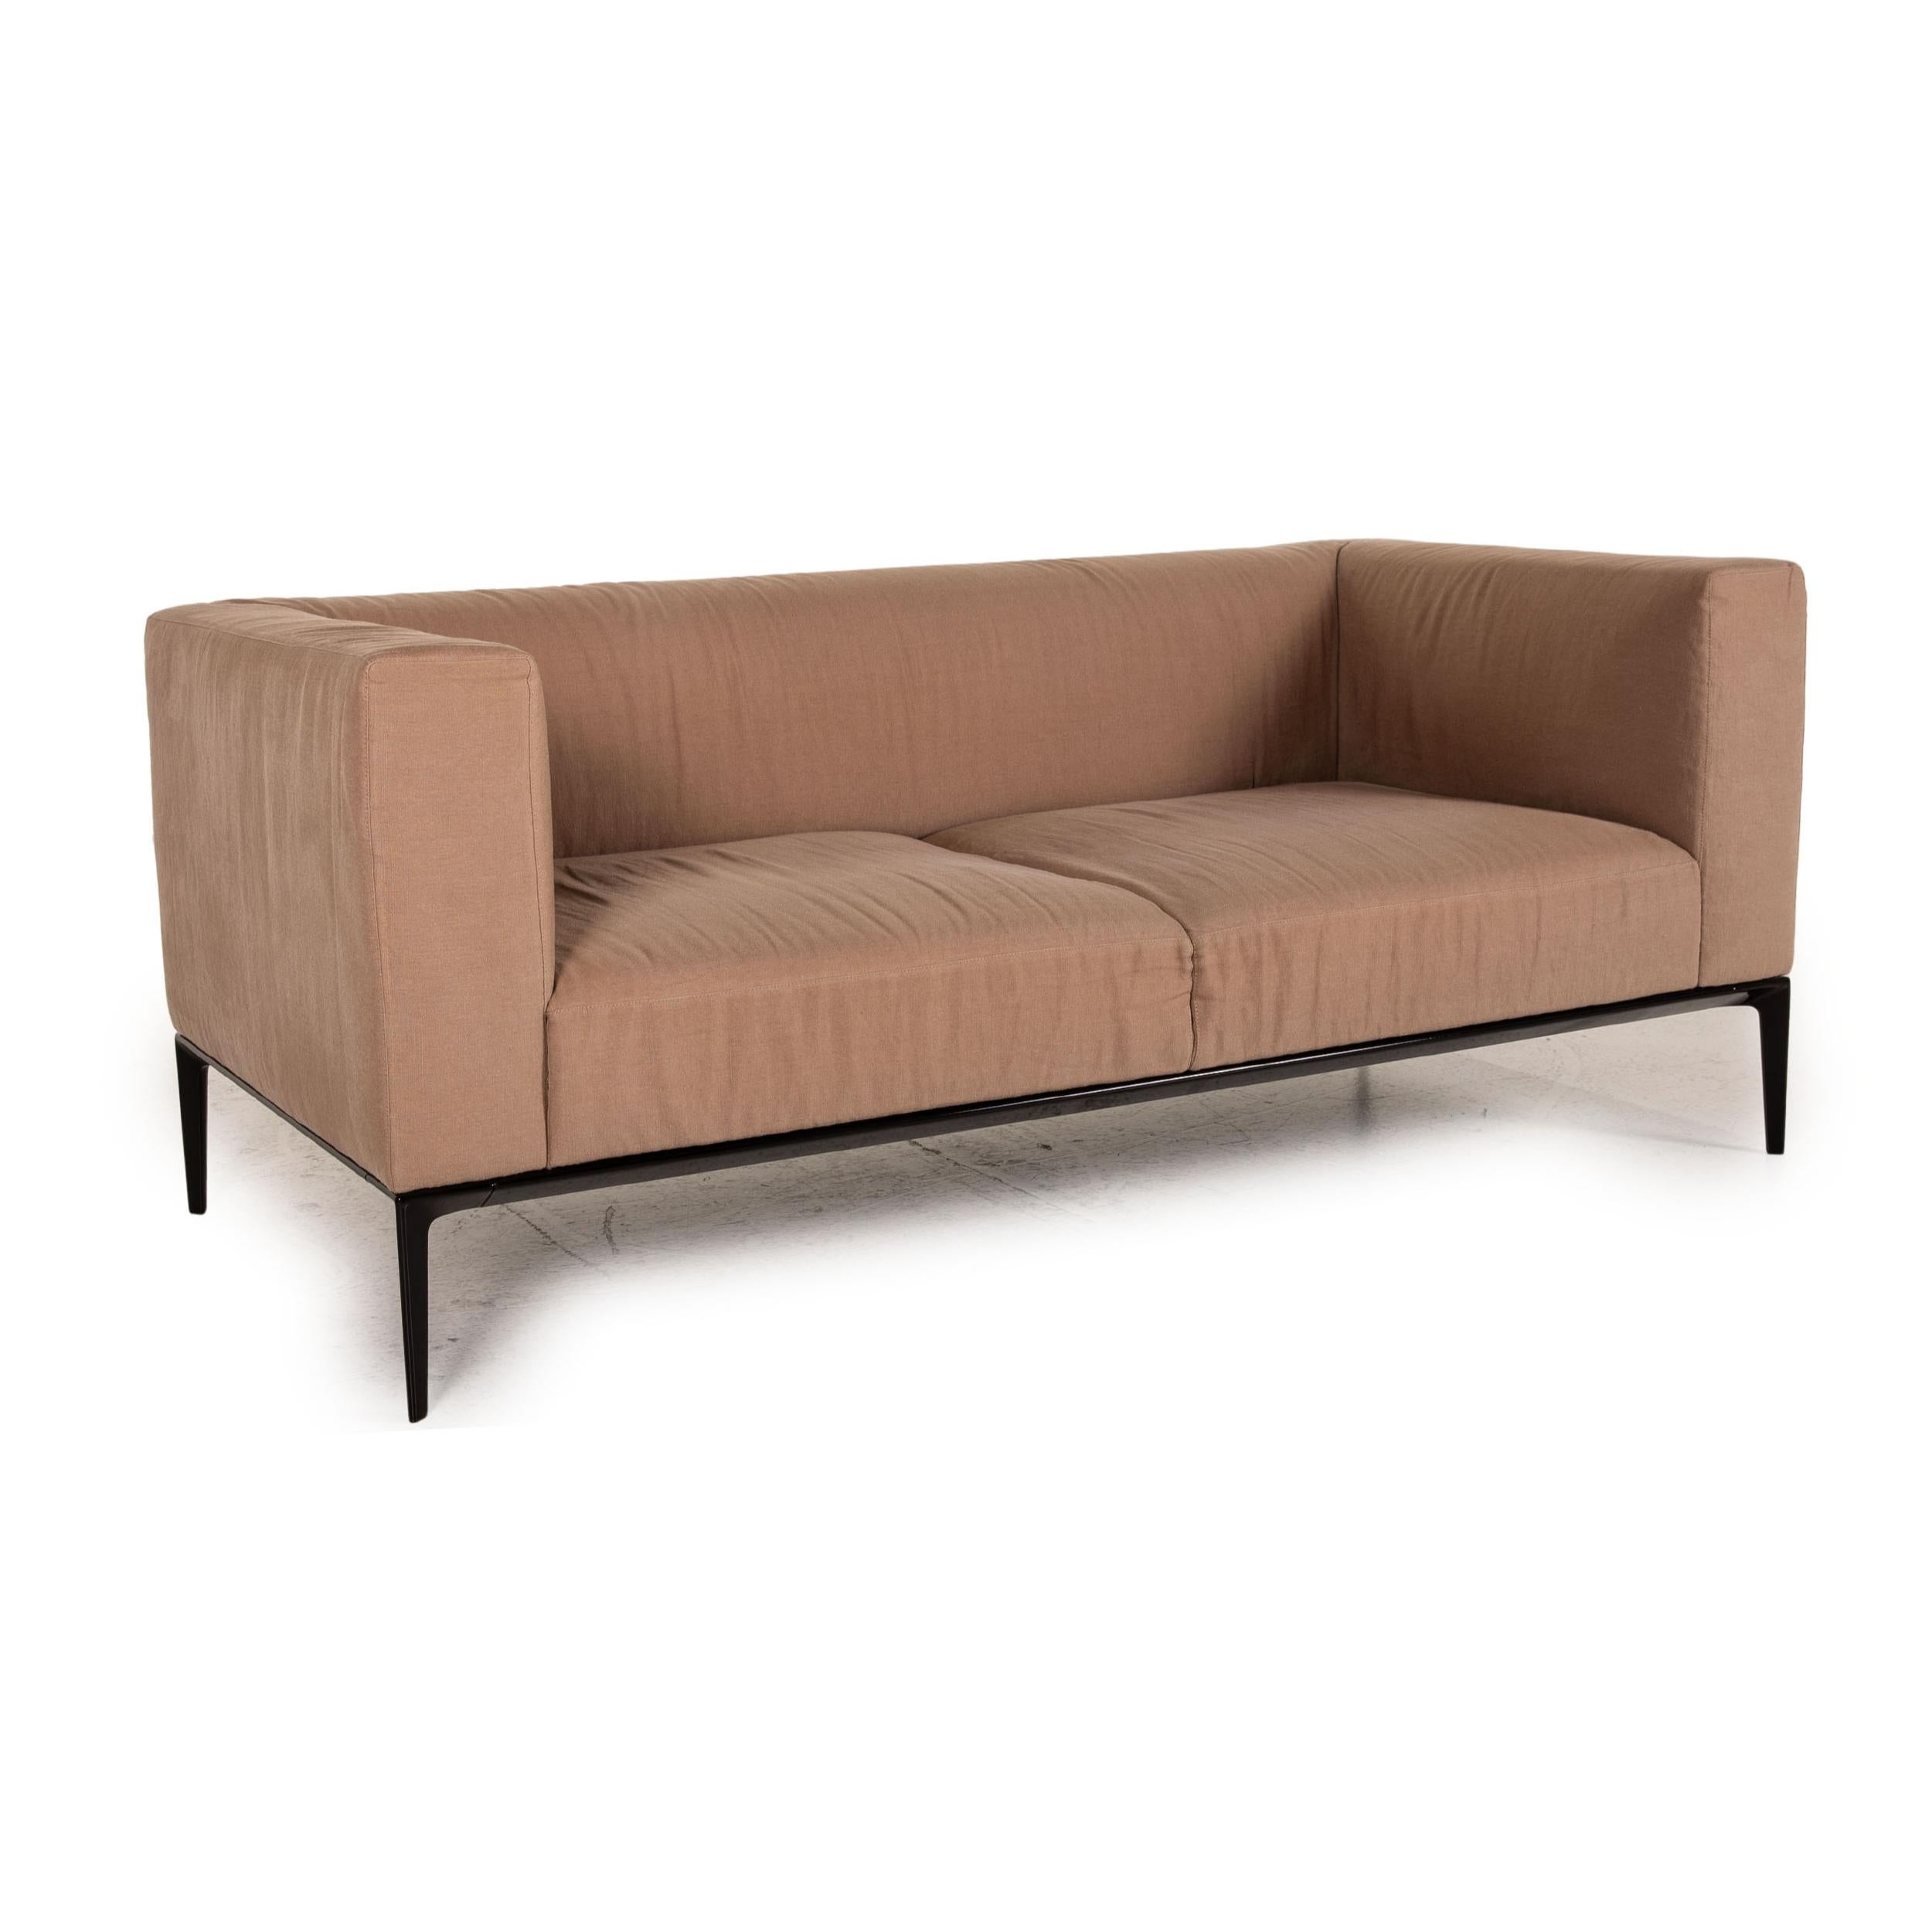 Walter Knoll Jaan Living Fabric Sofa Beige Two-Seater Couch In Good Condition For Sale In Cologne, DE